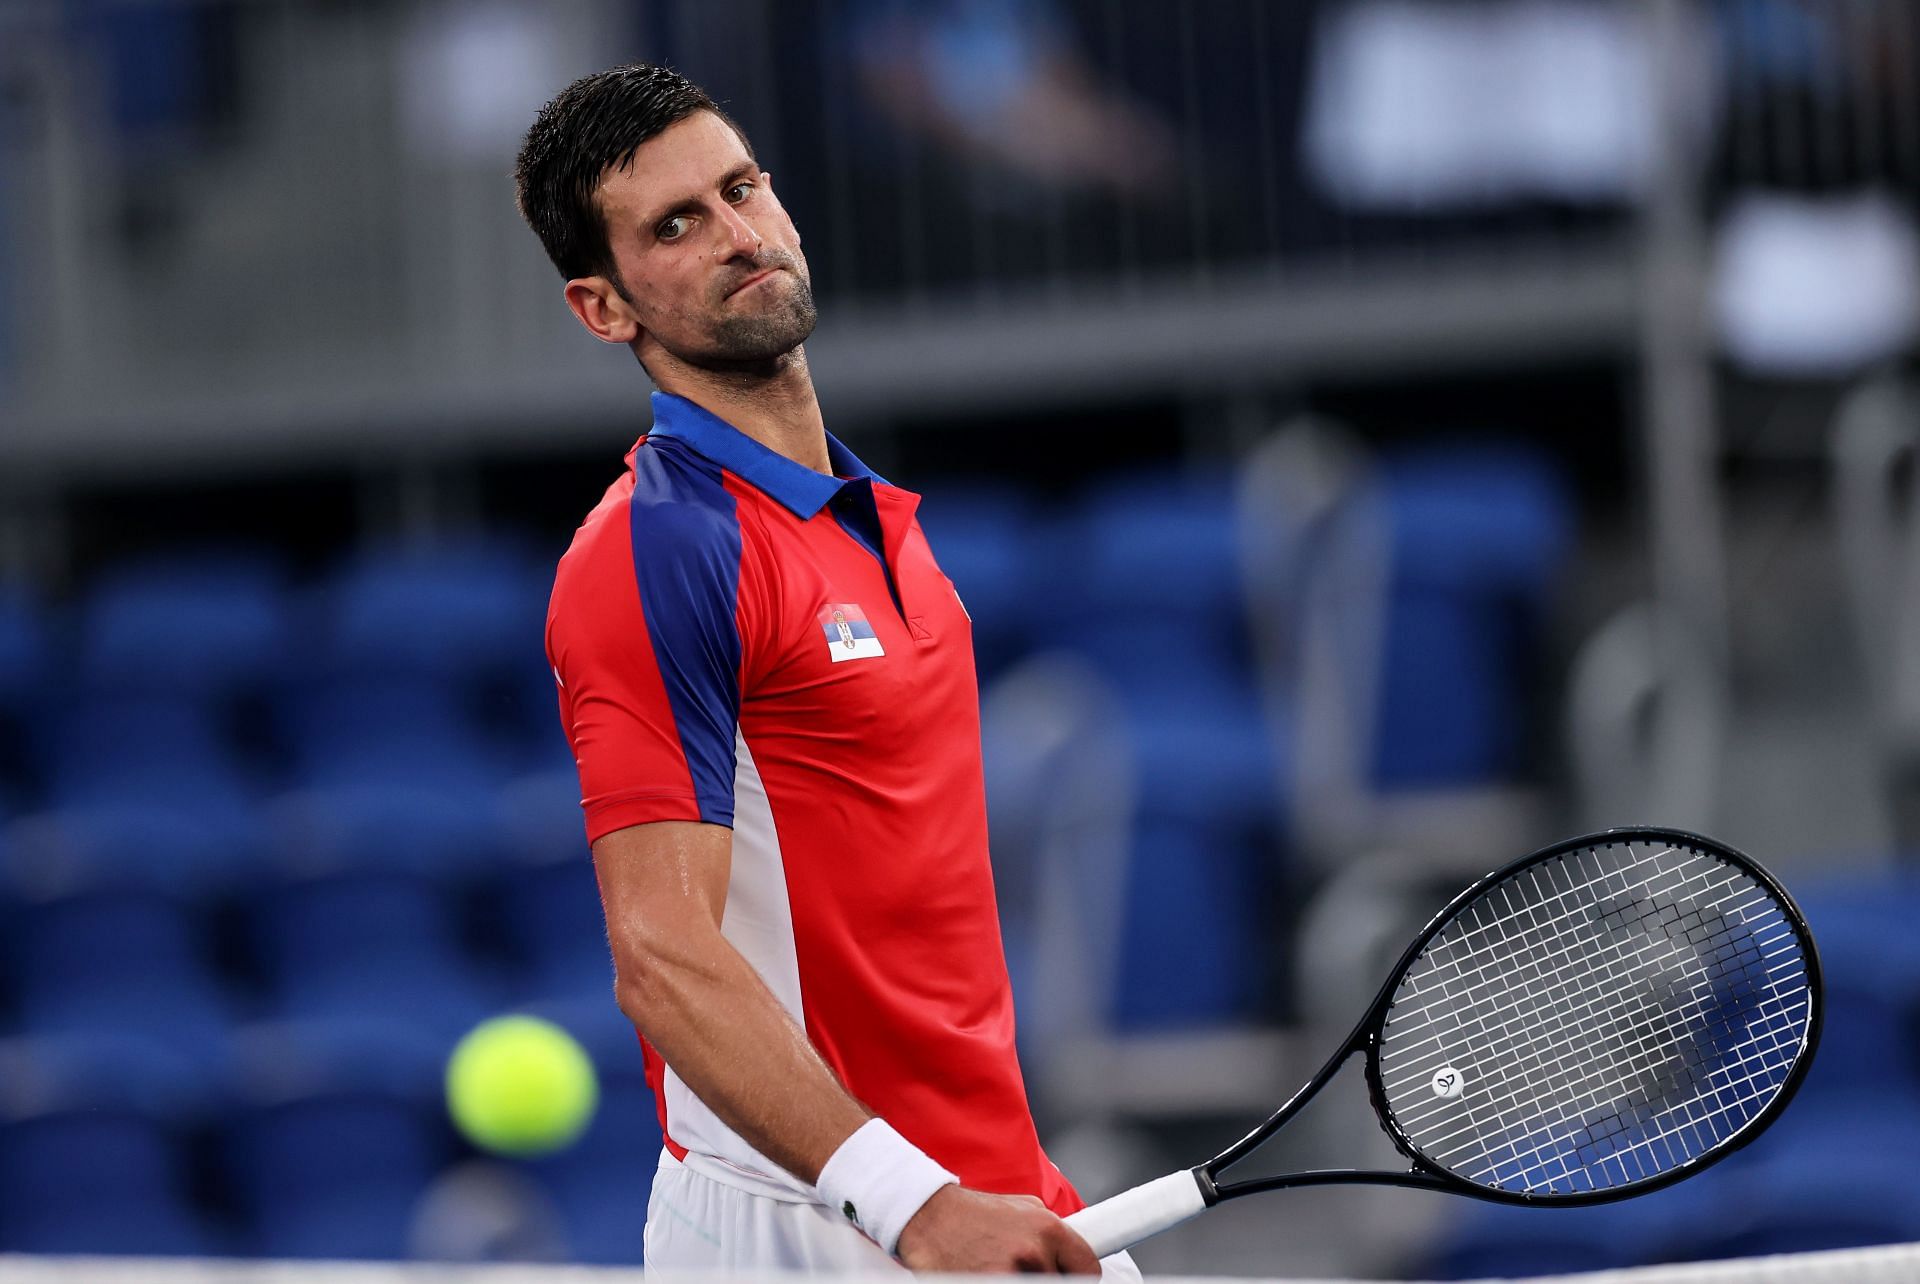 Novak Djokovic has caused a furore in the tennis world with his medical exemption